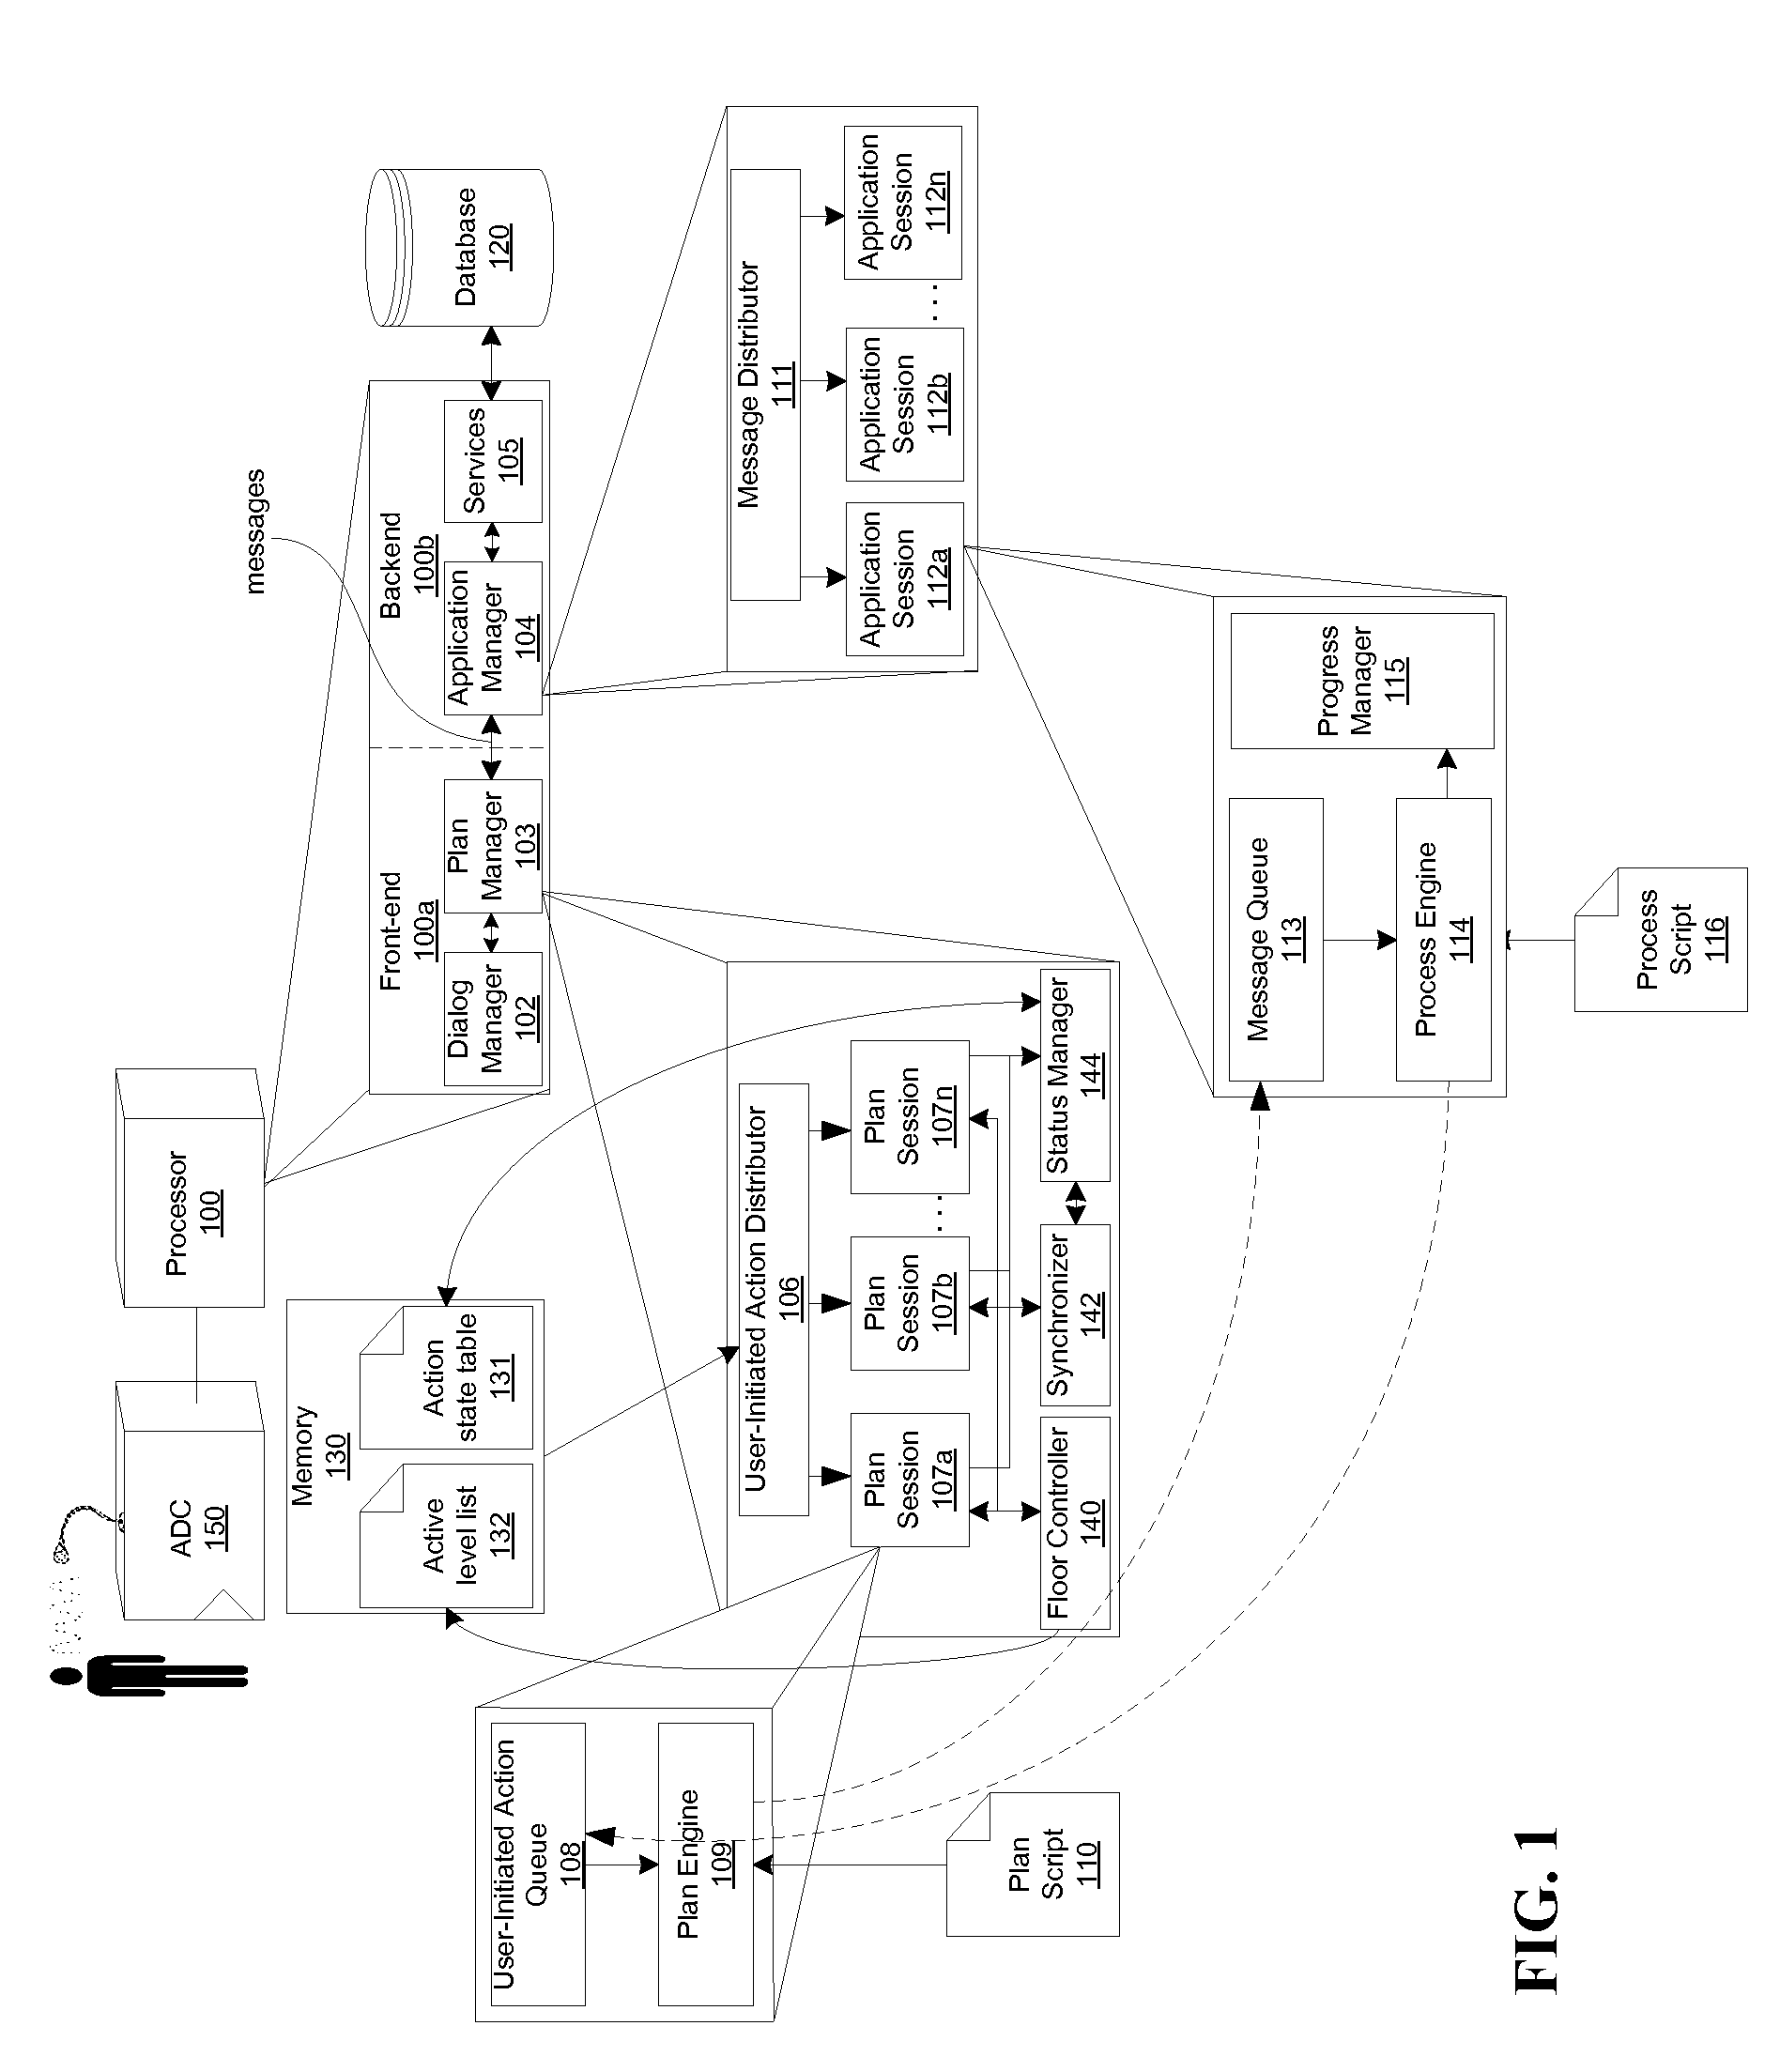 Method and system for processing multiple dialog sessions in parallel